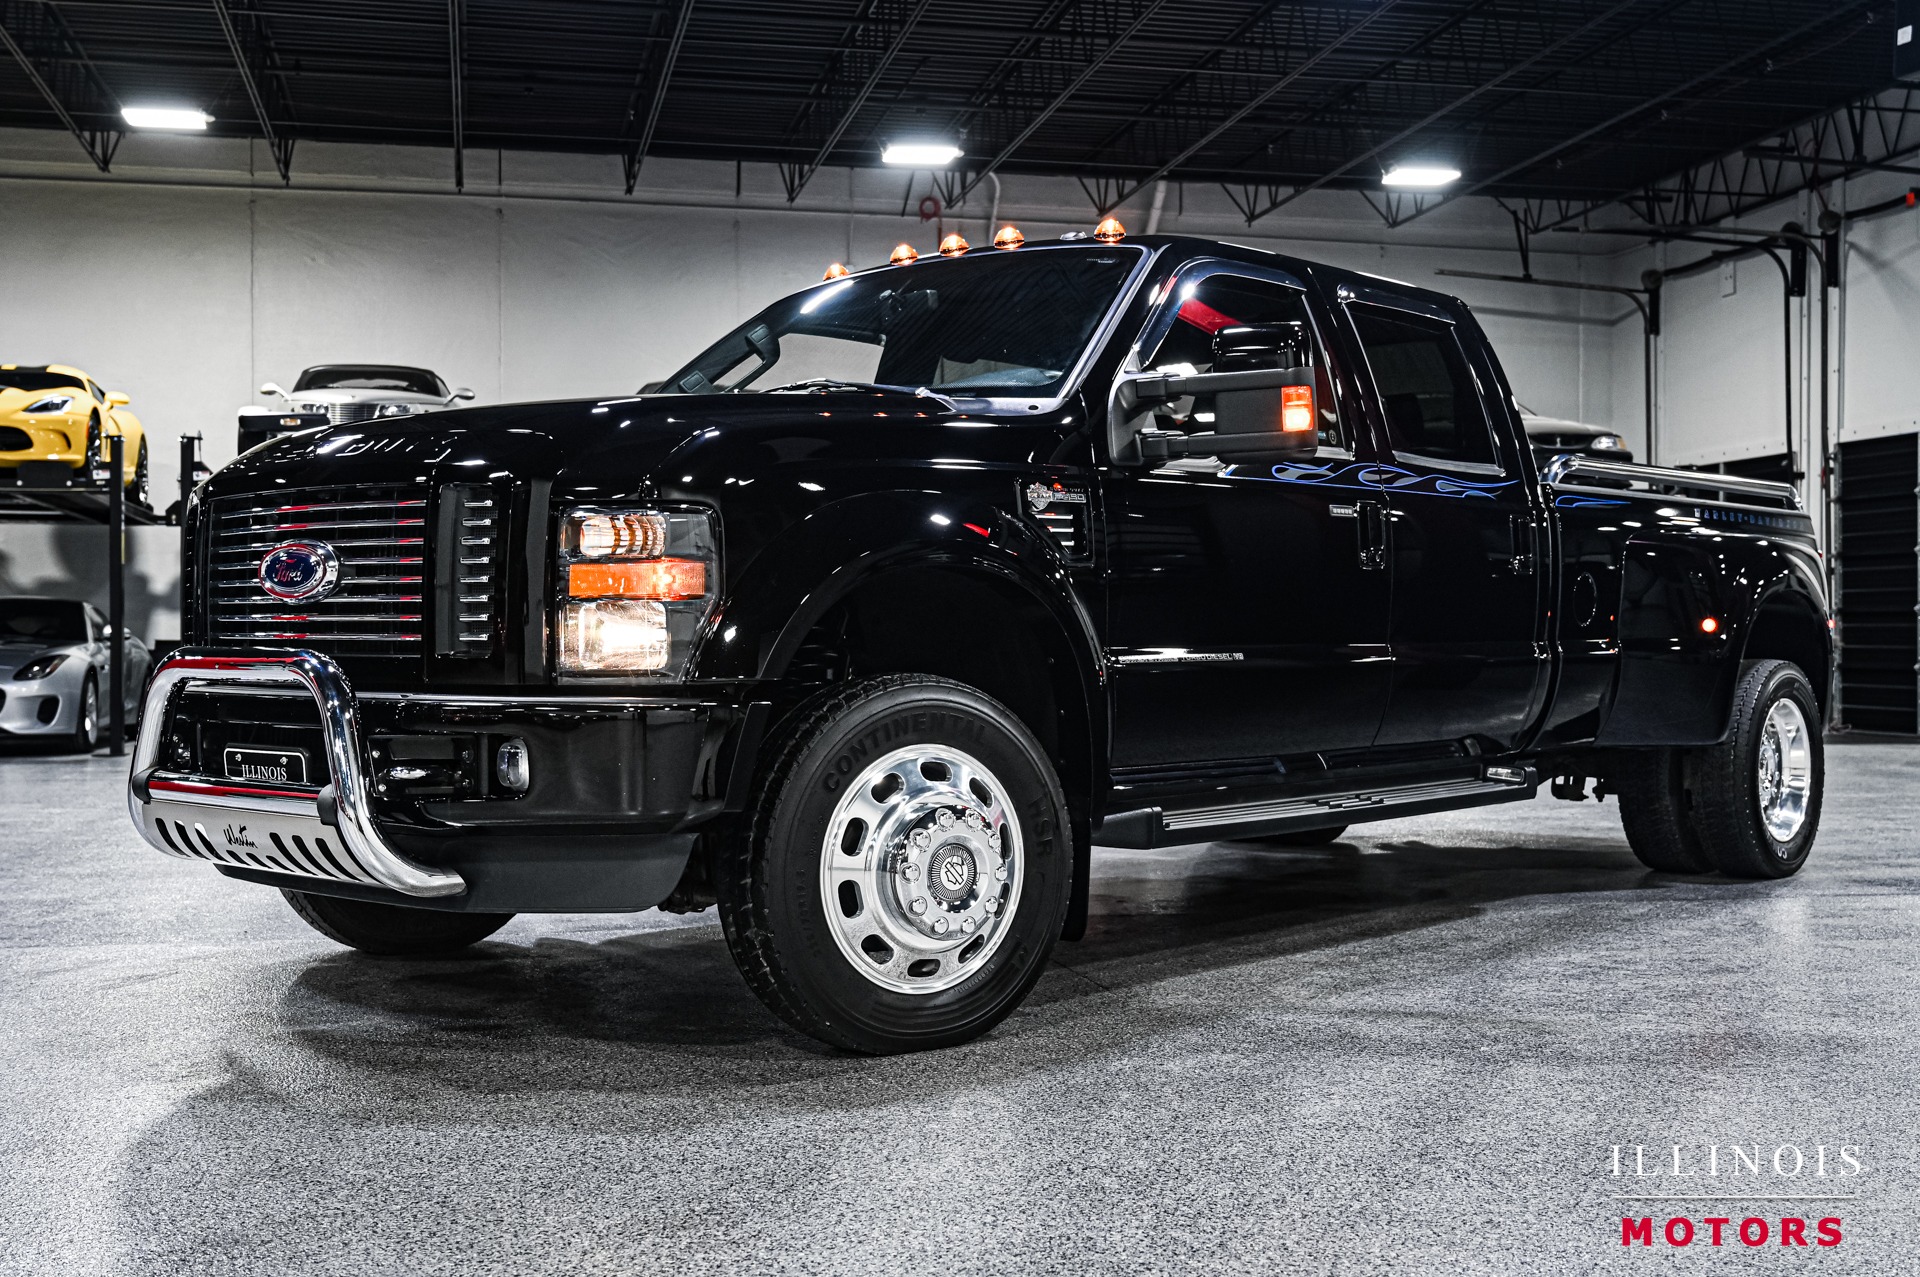 Used 2010 Ford F-450 Super Duty Harley-Davidson For Sale (Call for price) |  Illinois Motors Stock #ILM1776